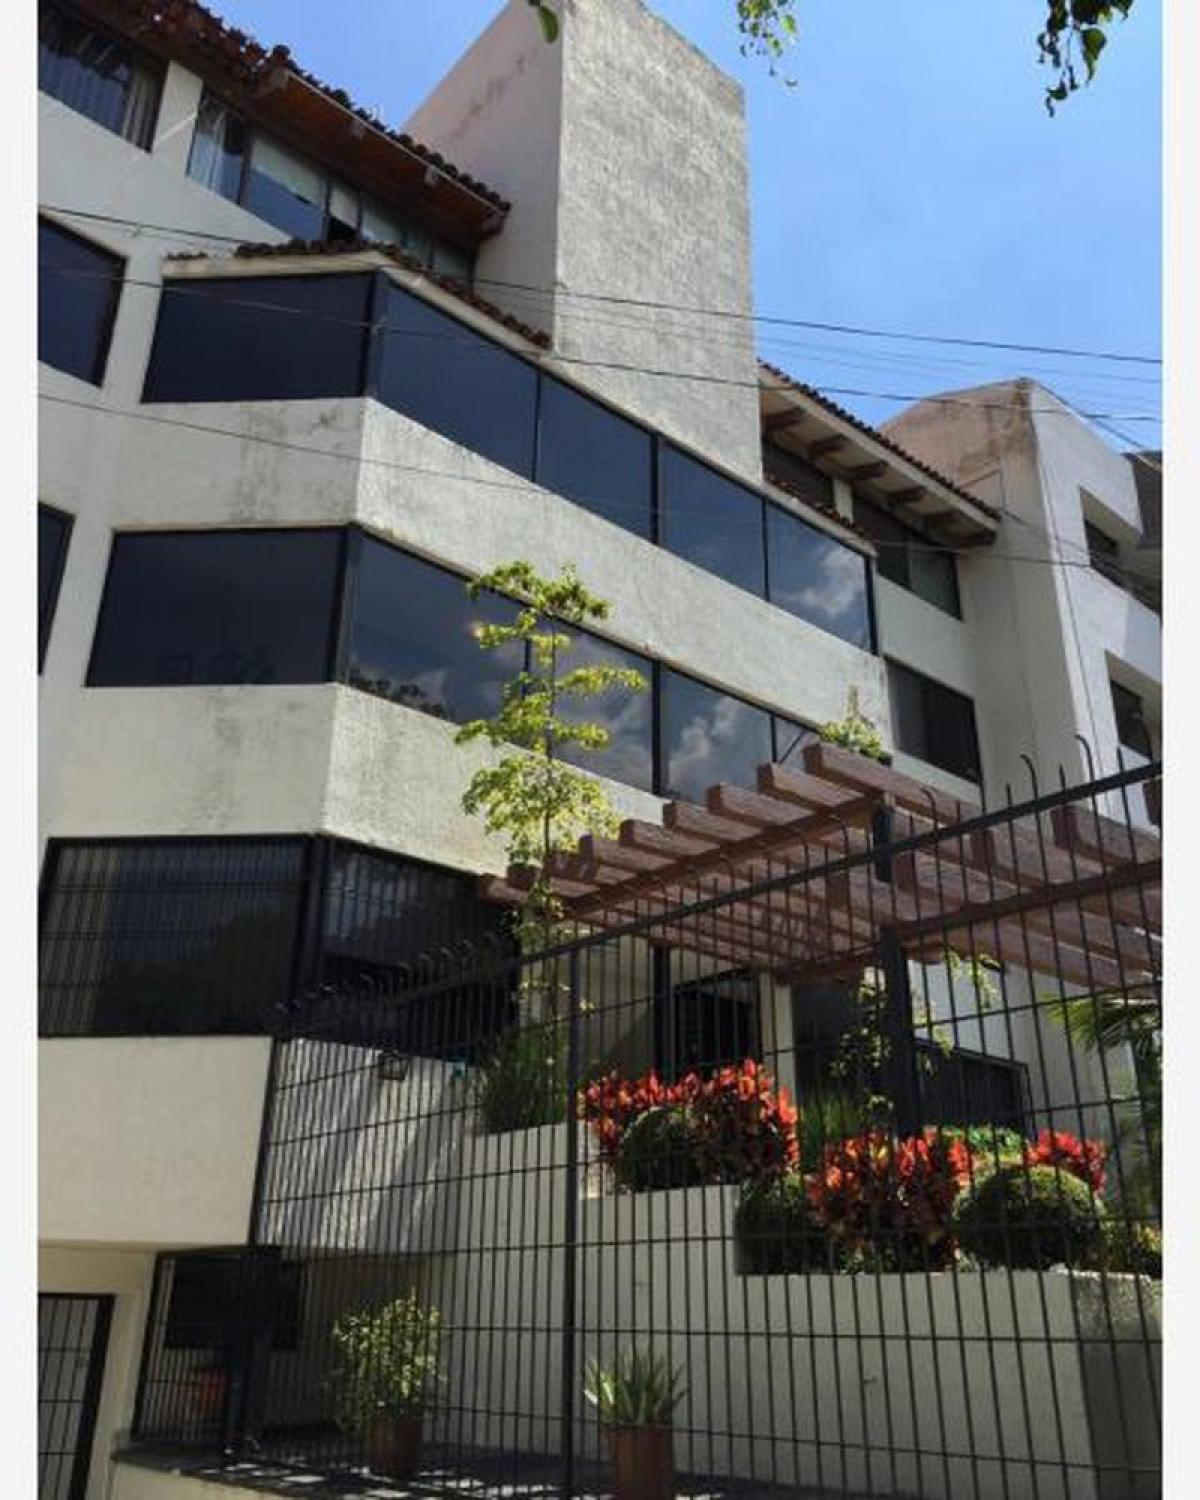 Picture of Apartment For Sale in Guadalajara, Jalisco, Mexico